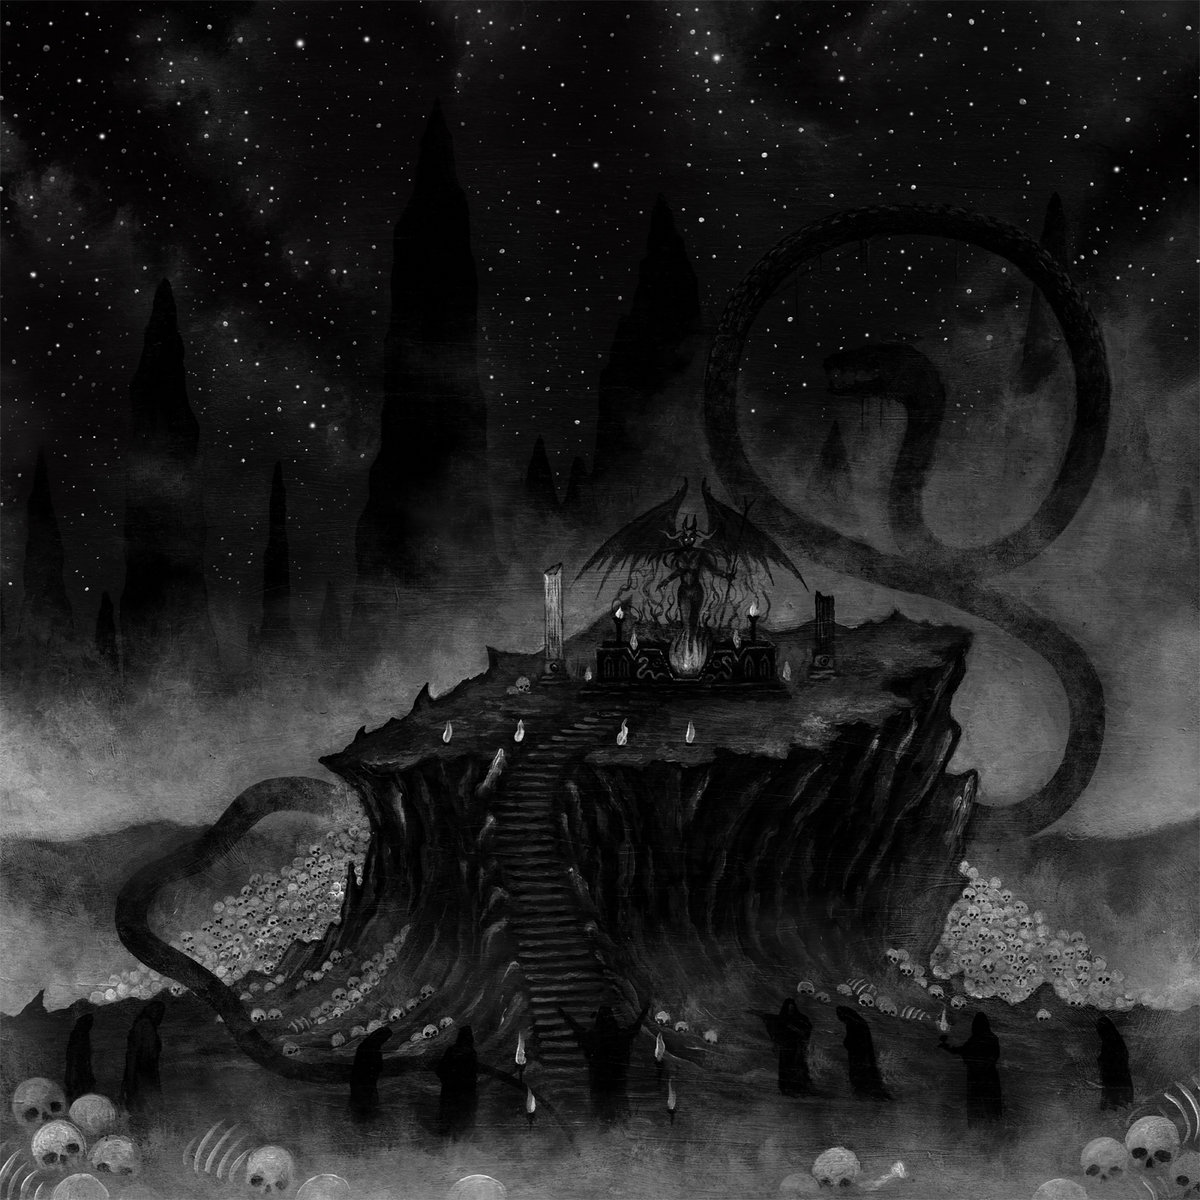 goatspell – ascension of the drakonian beast [ep]